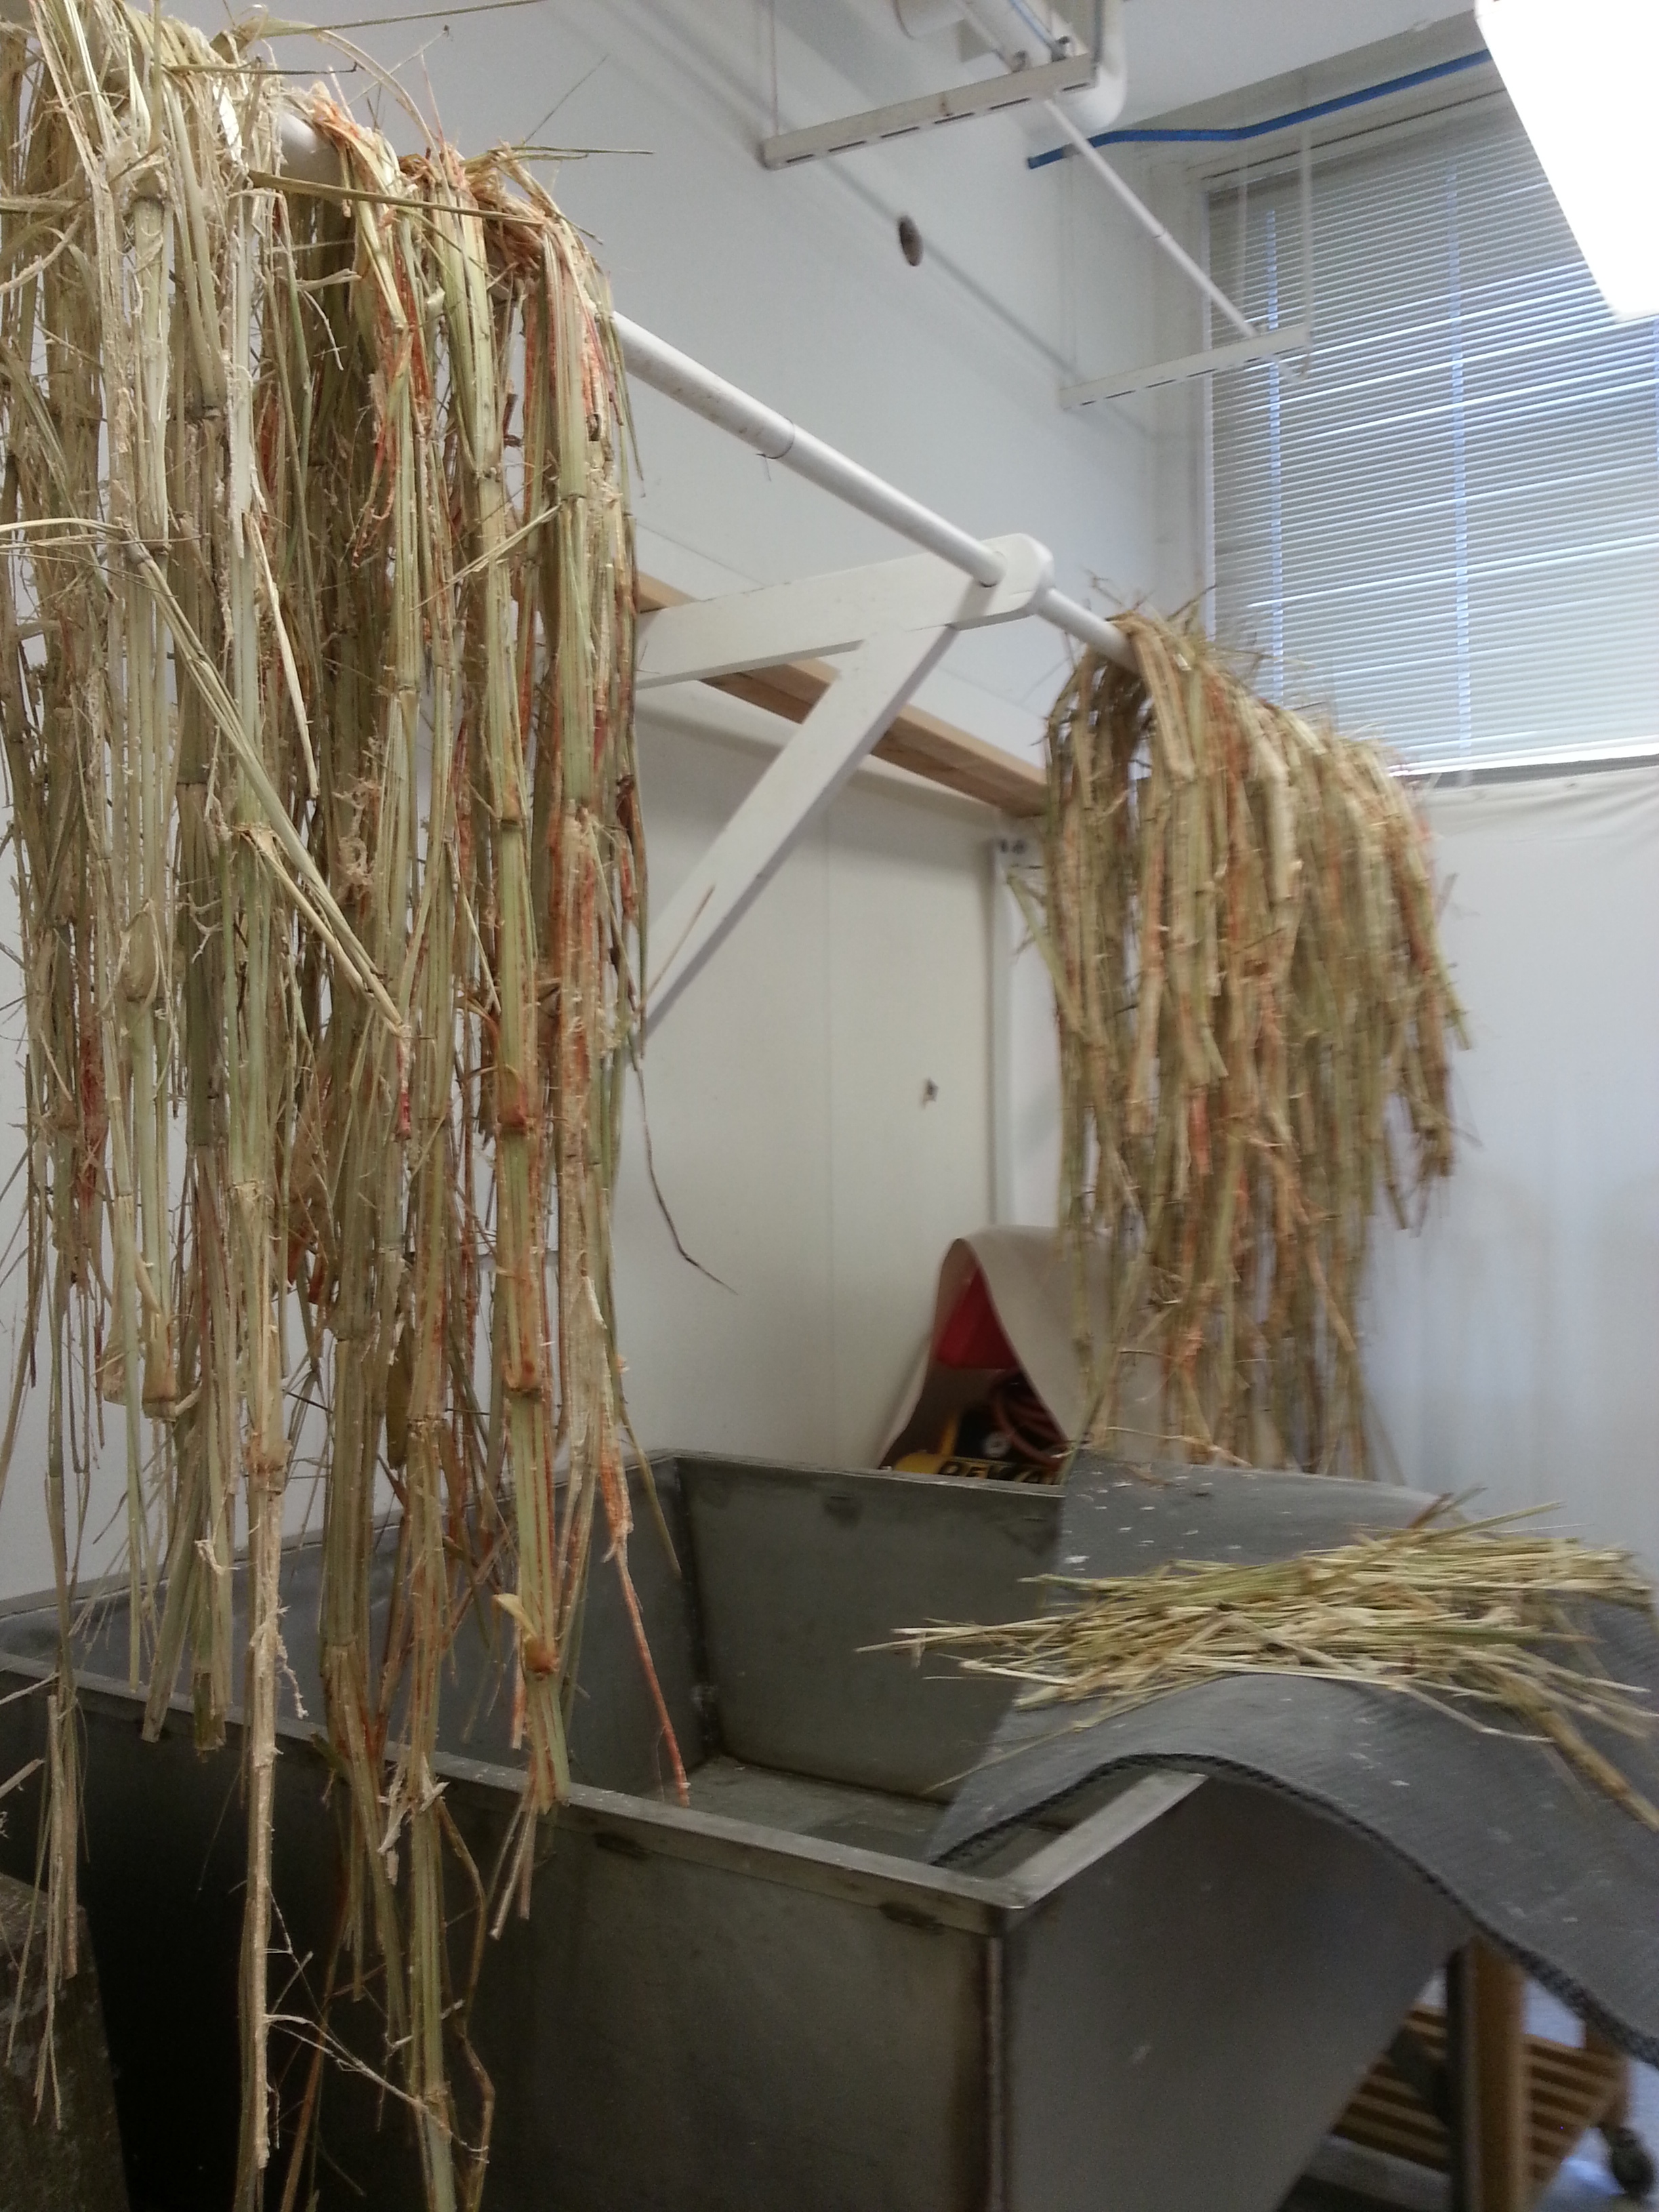  In the fall the crop was harvested by students, and prepped for pressing by stripping it of all its leaves. &nbsp;Once prepped it was loaded and transported to an annual sorghum festival in Fall River, Wisconsin.  ... 